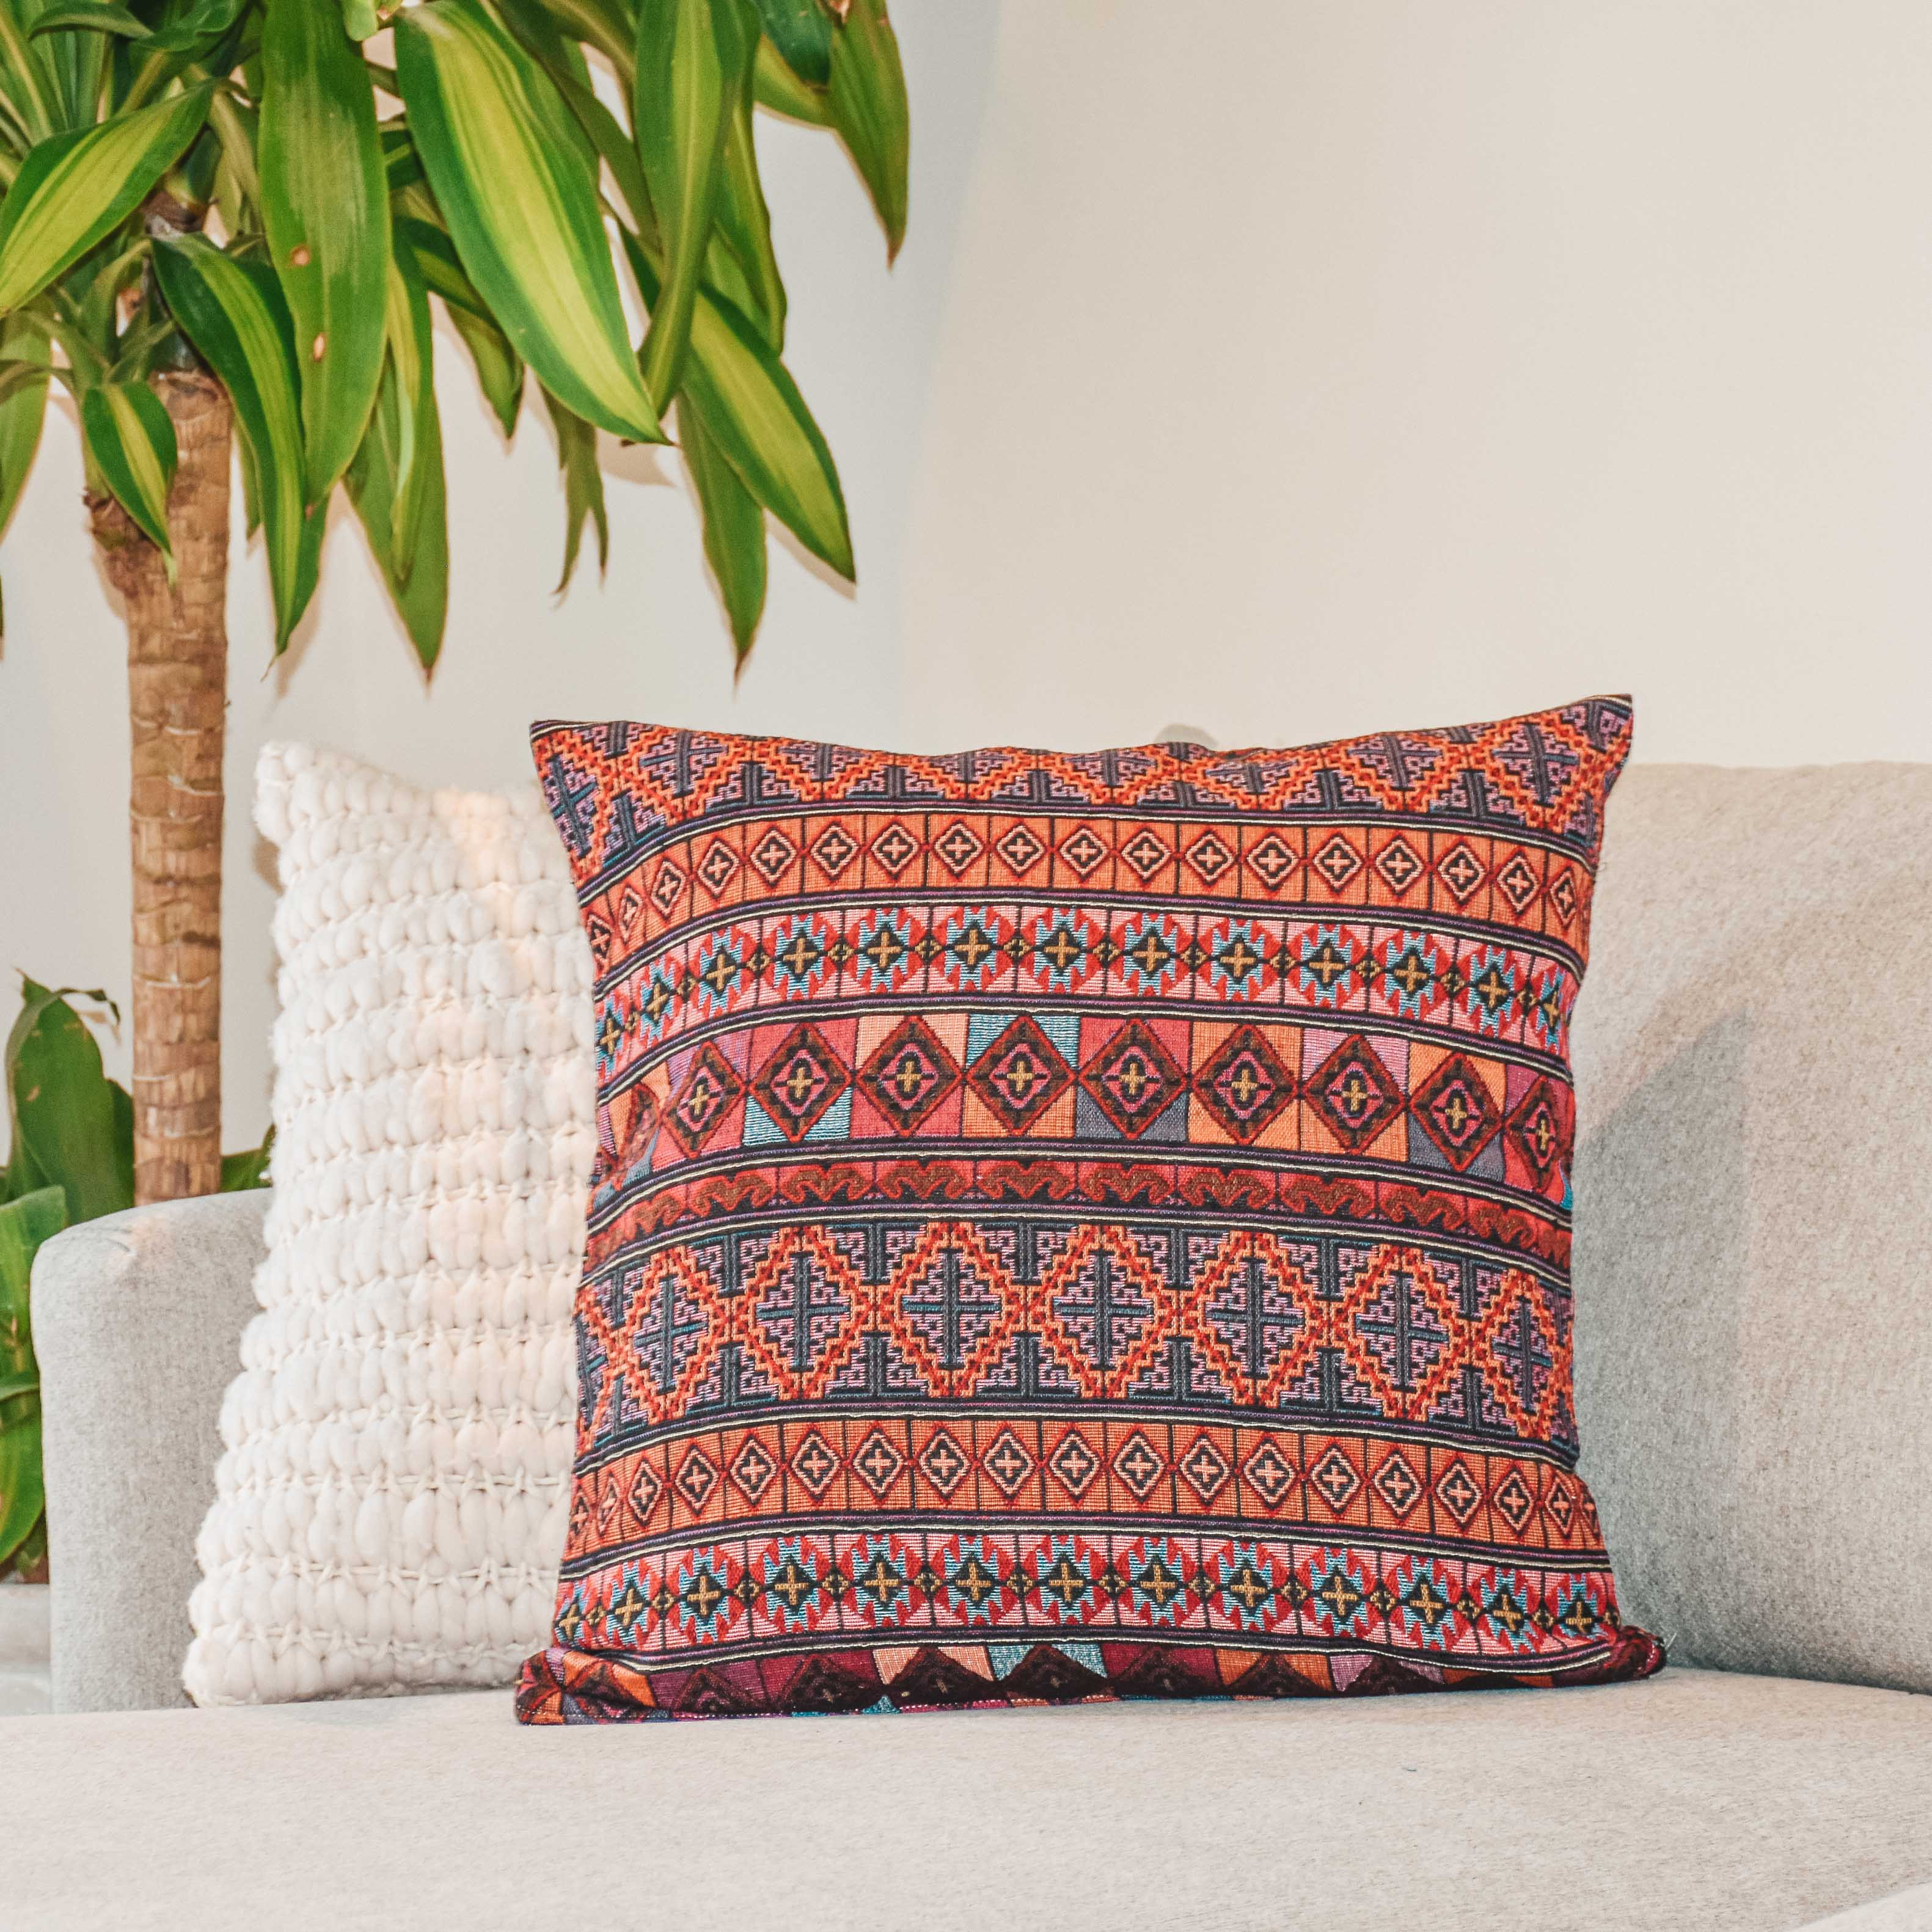 VELETA PILLOW COVER Elepanta Pillows - Buy Today Elephant Pants Jewelry And Bohemian Clothes Handmade In Thailand Help To Save The Elephants FairTrade And Vegan